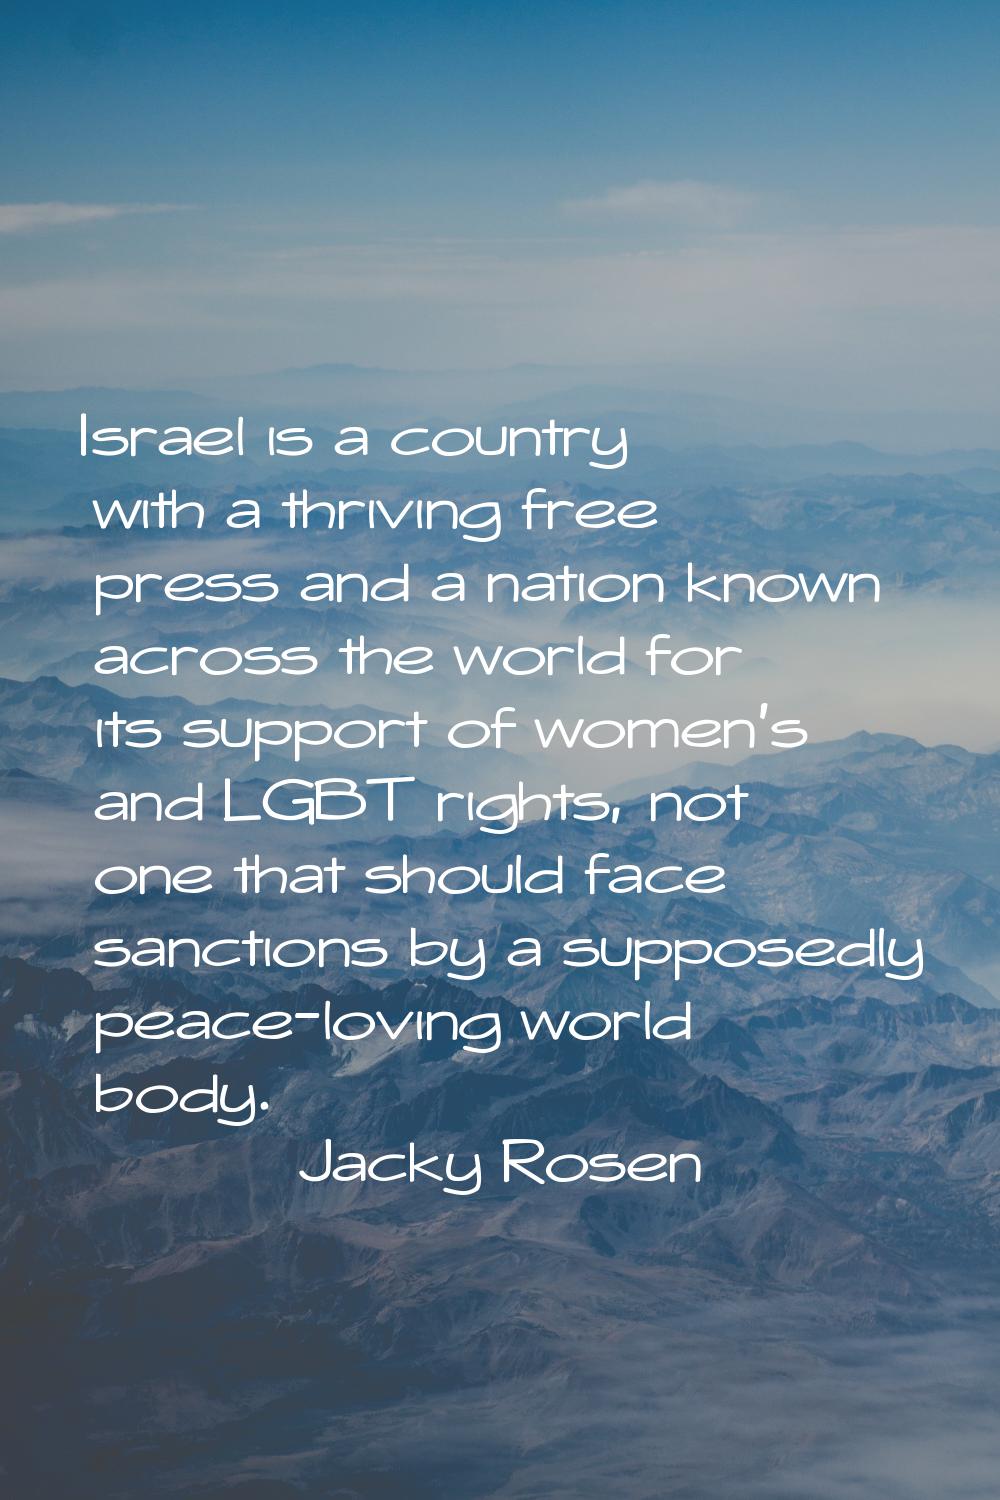 Israel is a country with a thriving free press and a nation known across the world for its support 